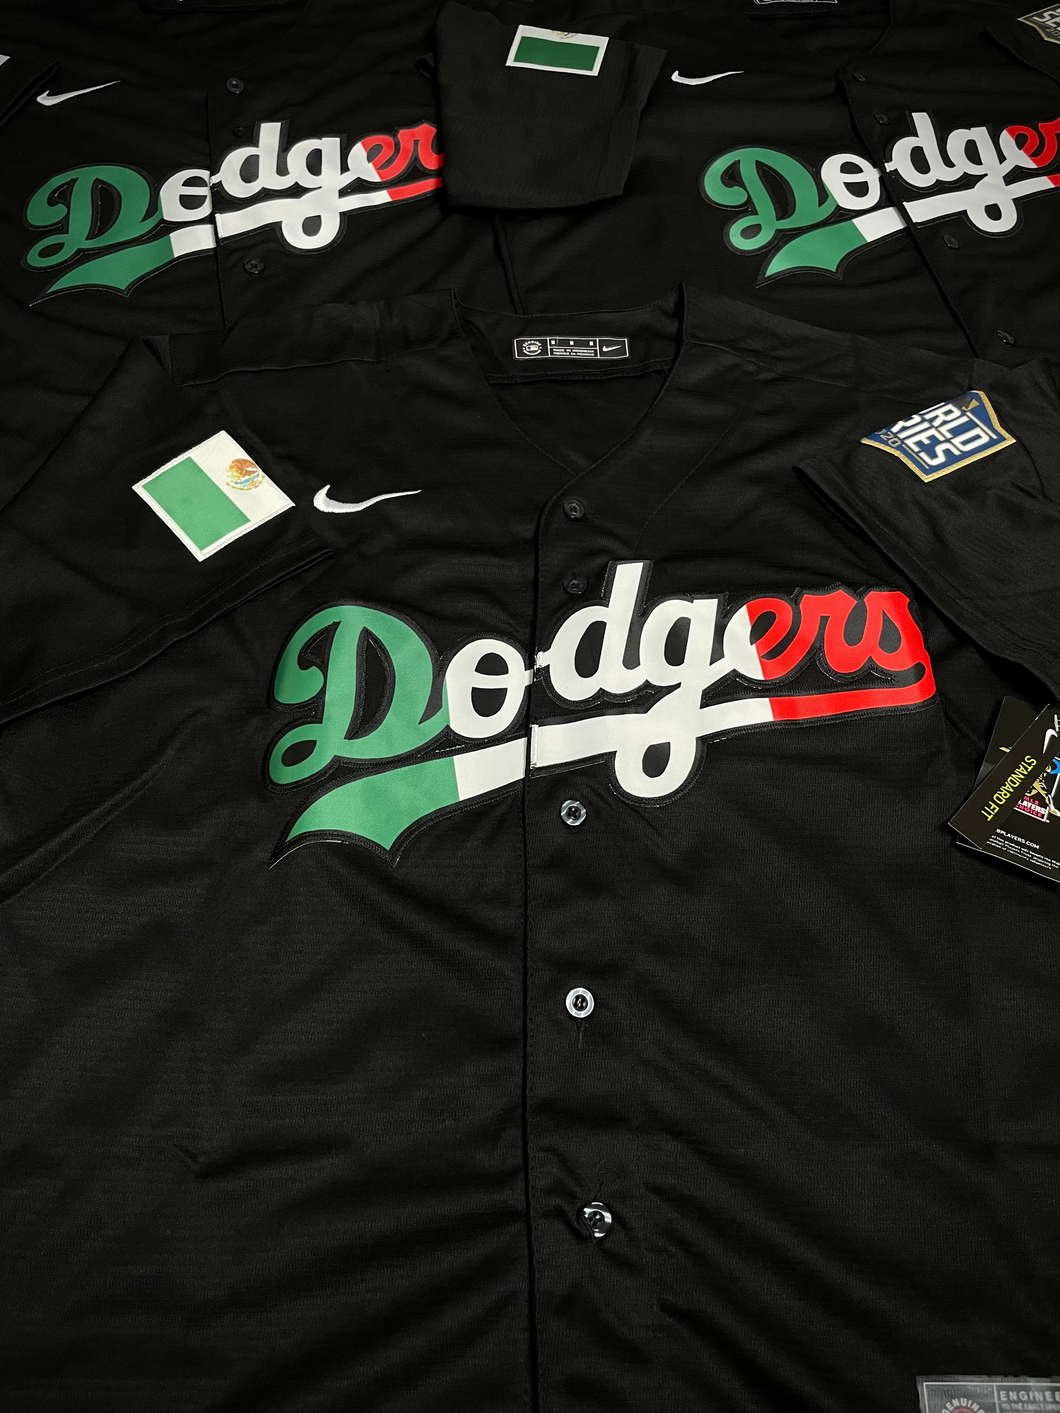 MENS EXCLUSIVE DODGERS MEXICO EDITION JERSEY